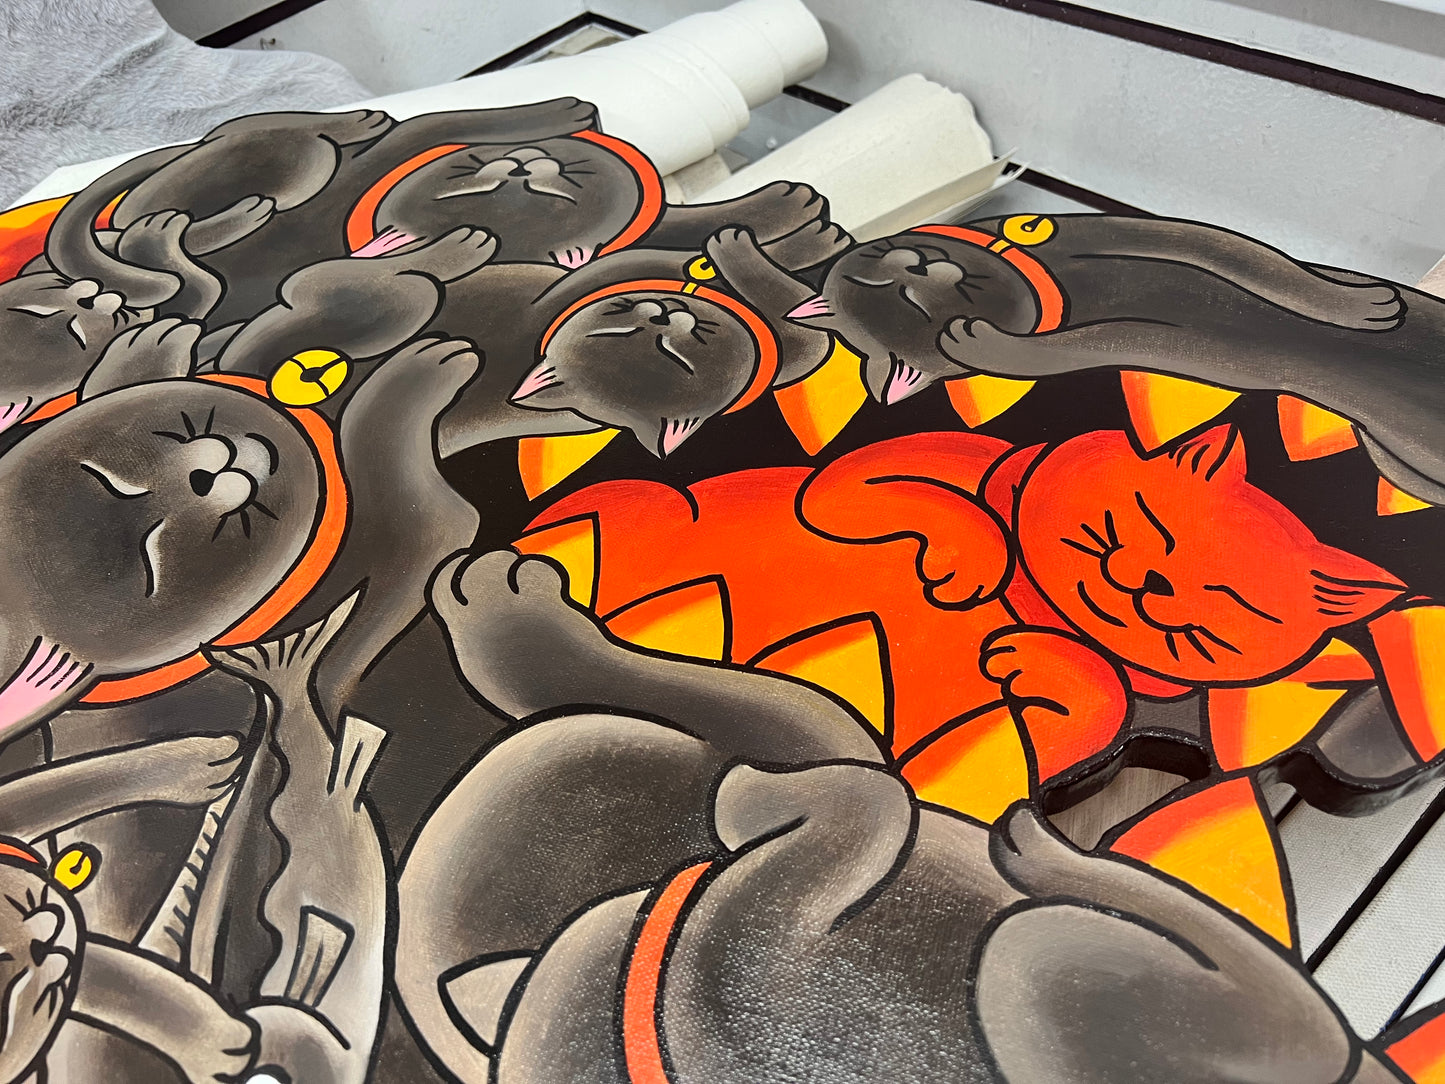 OFFART X Horiren Red Flame Hundred Cats 100% Hand-Painted Print